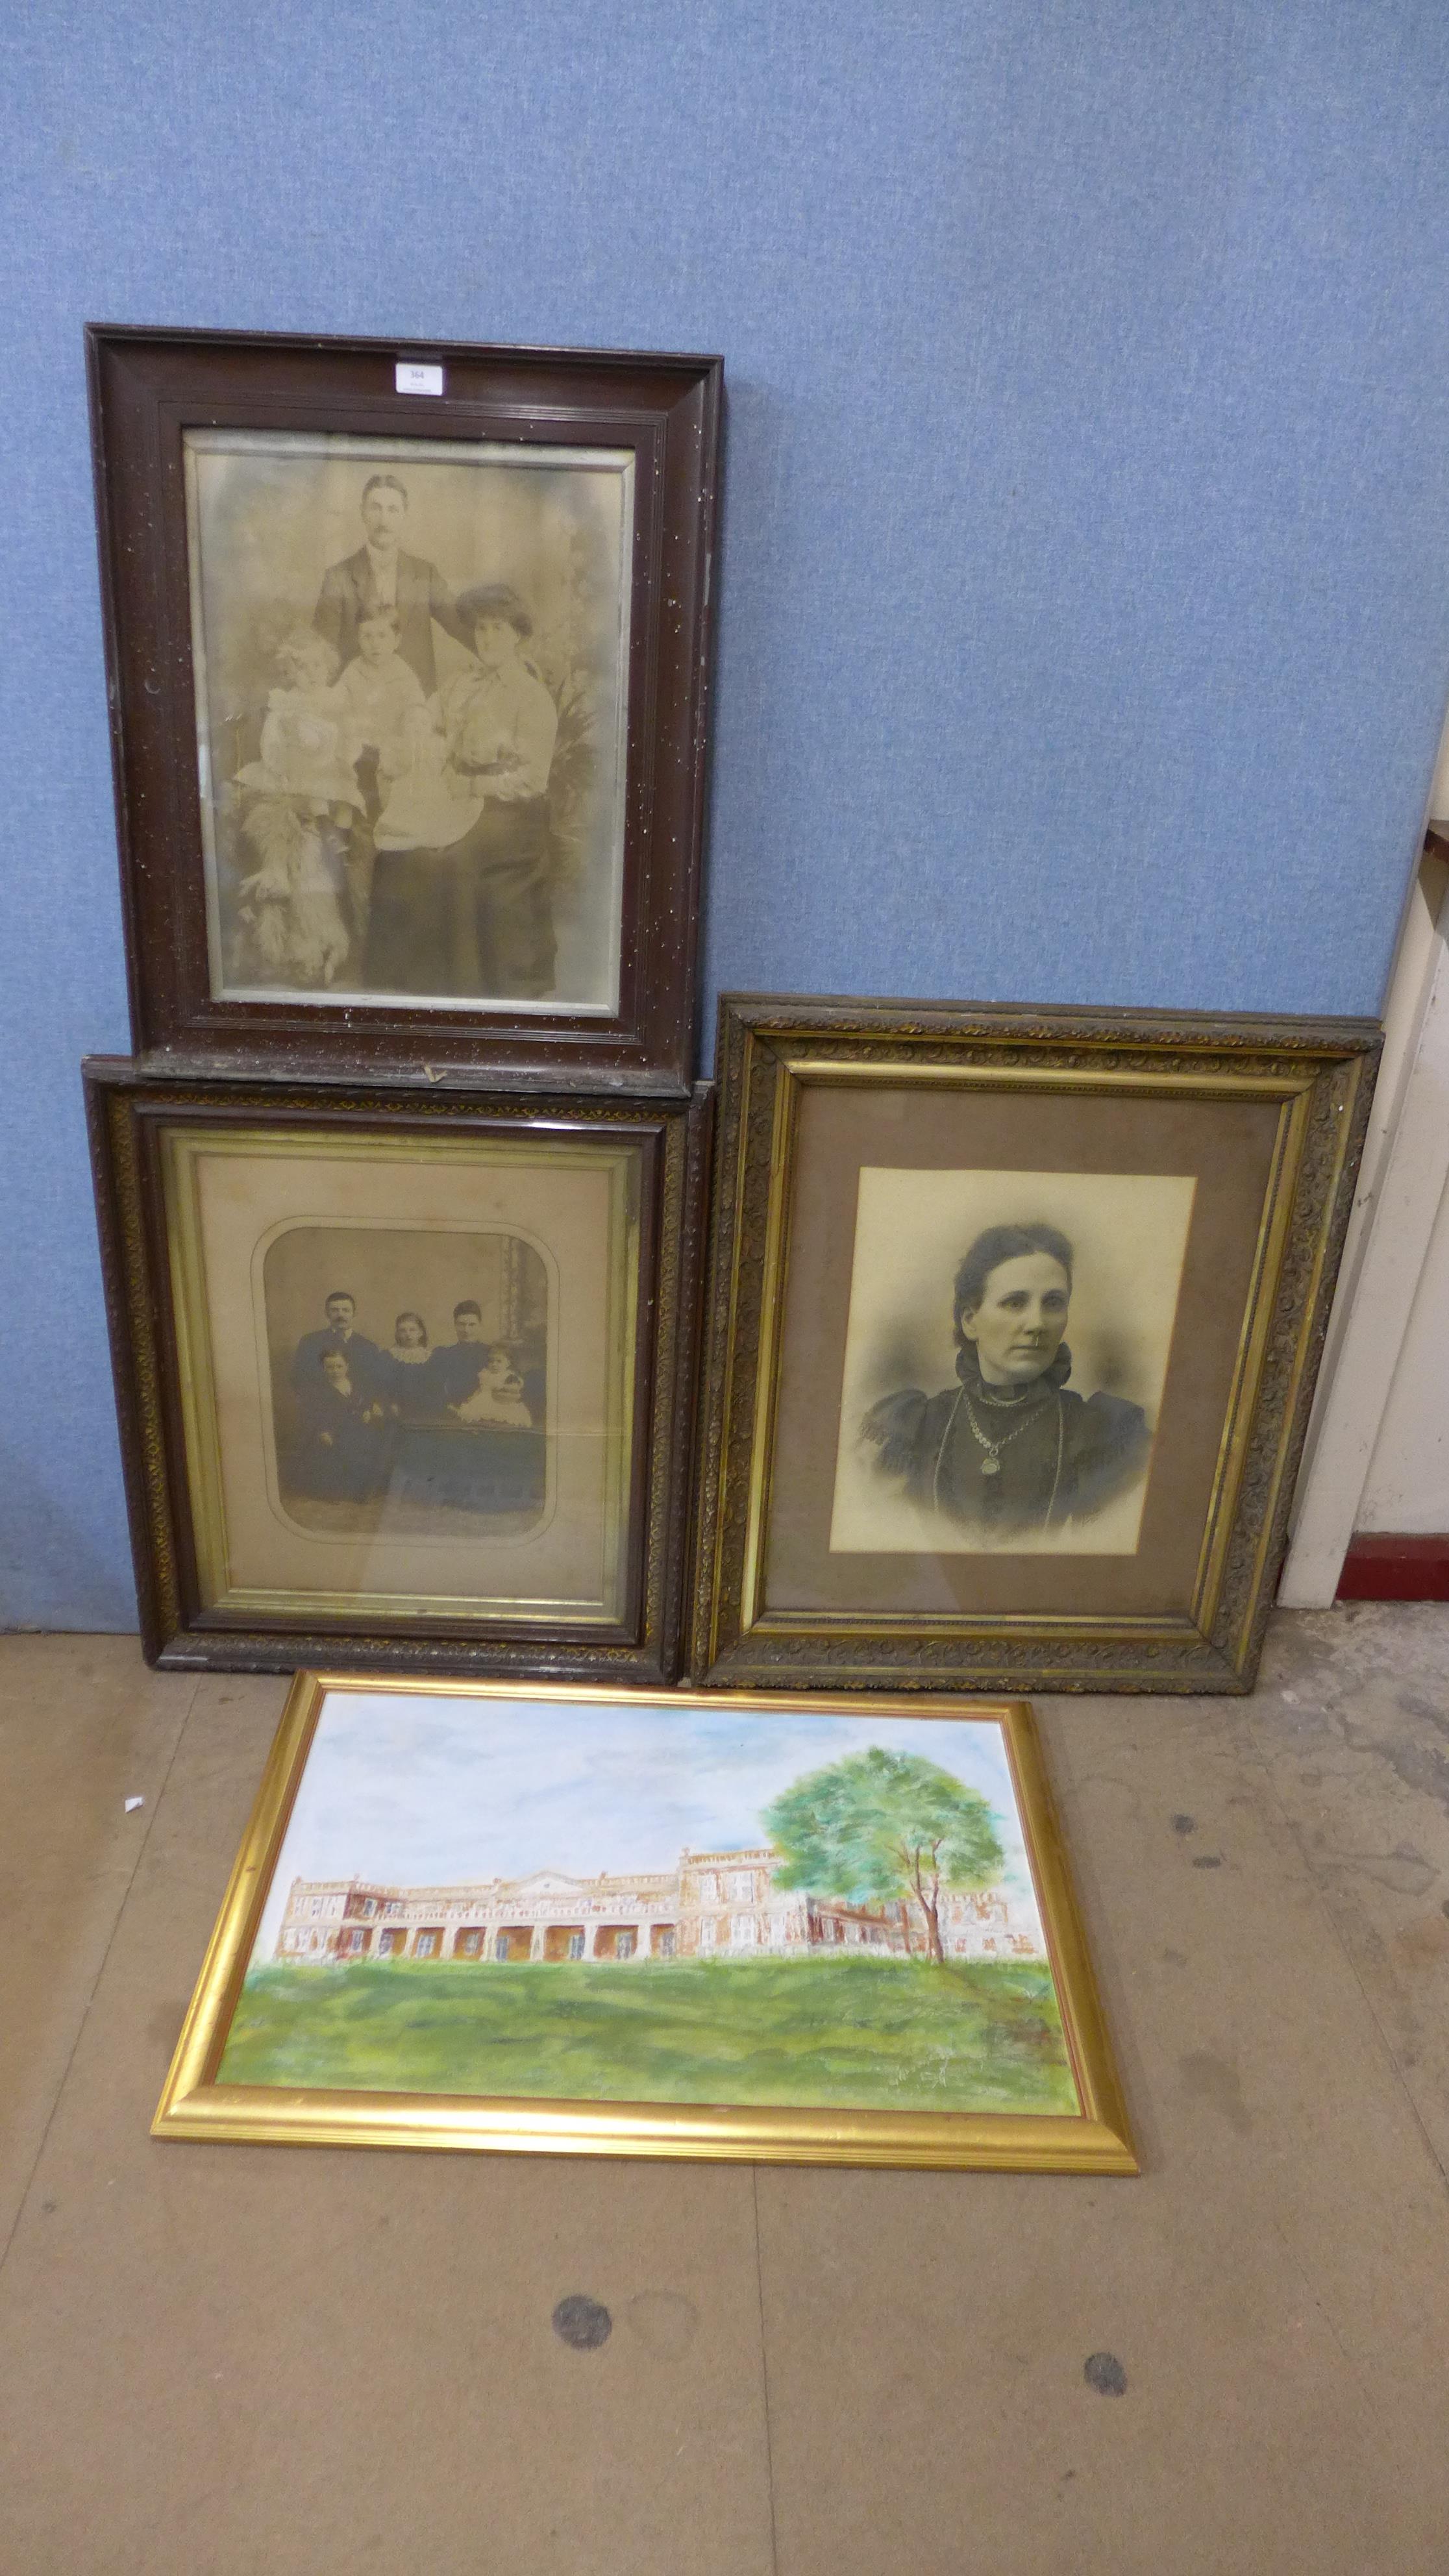 Three large framed photographs with an oil painting